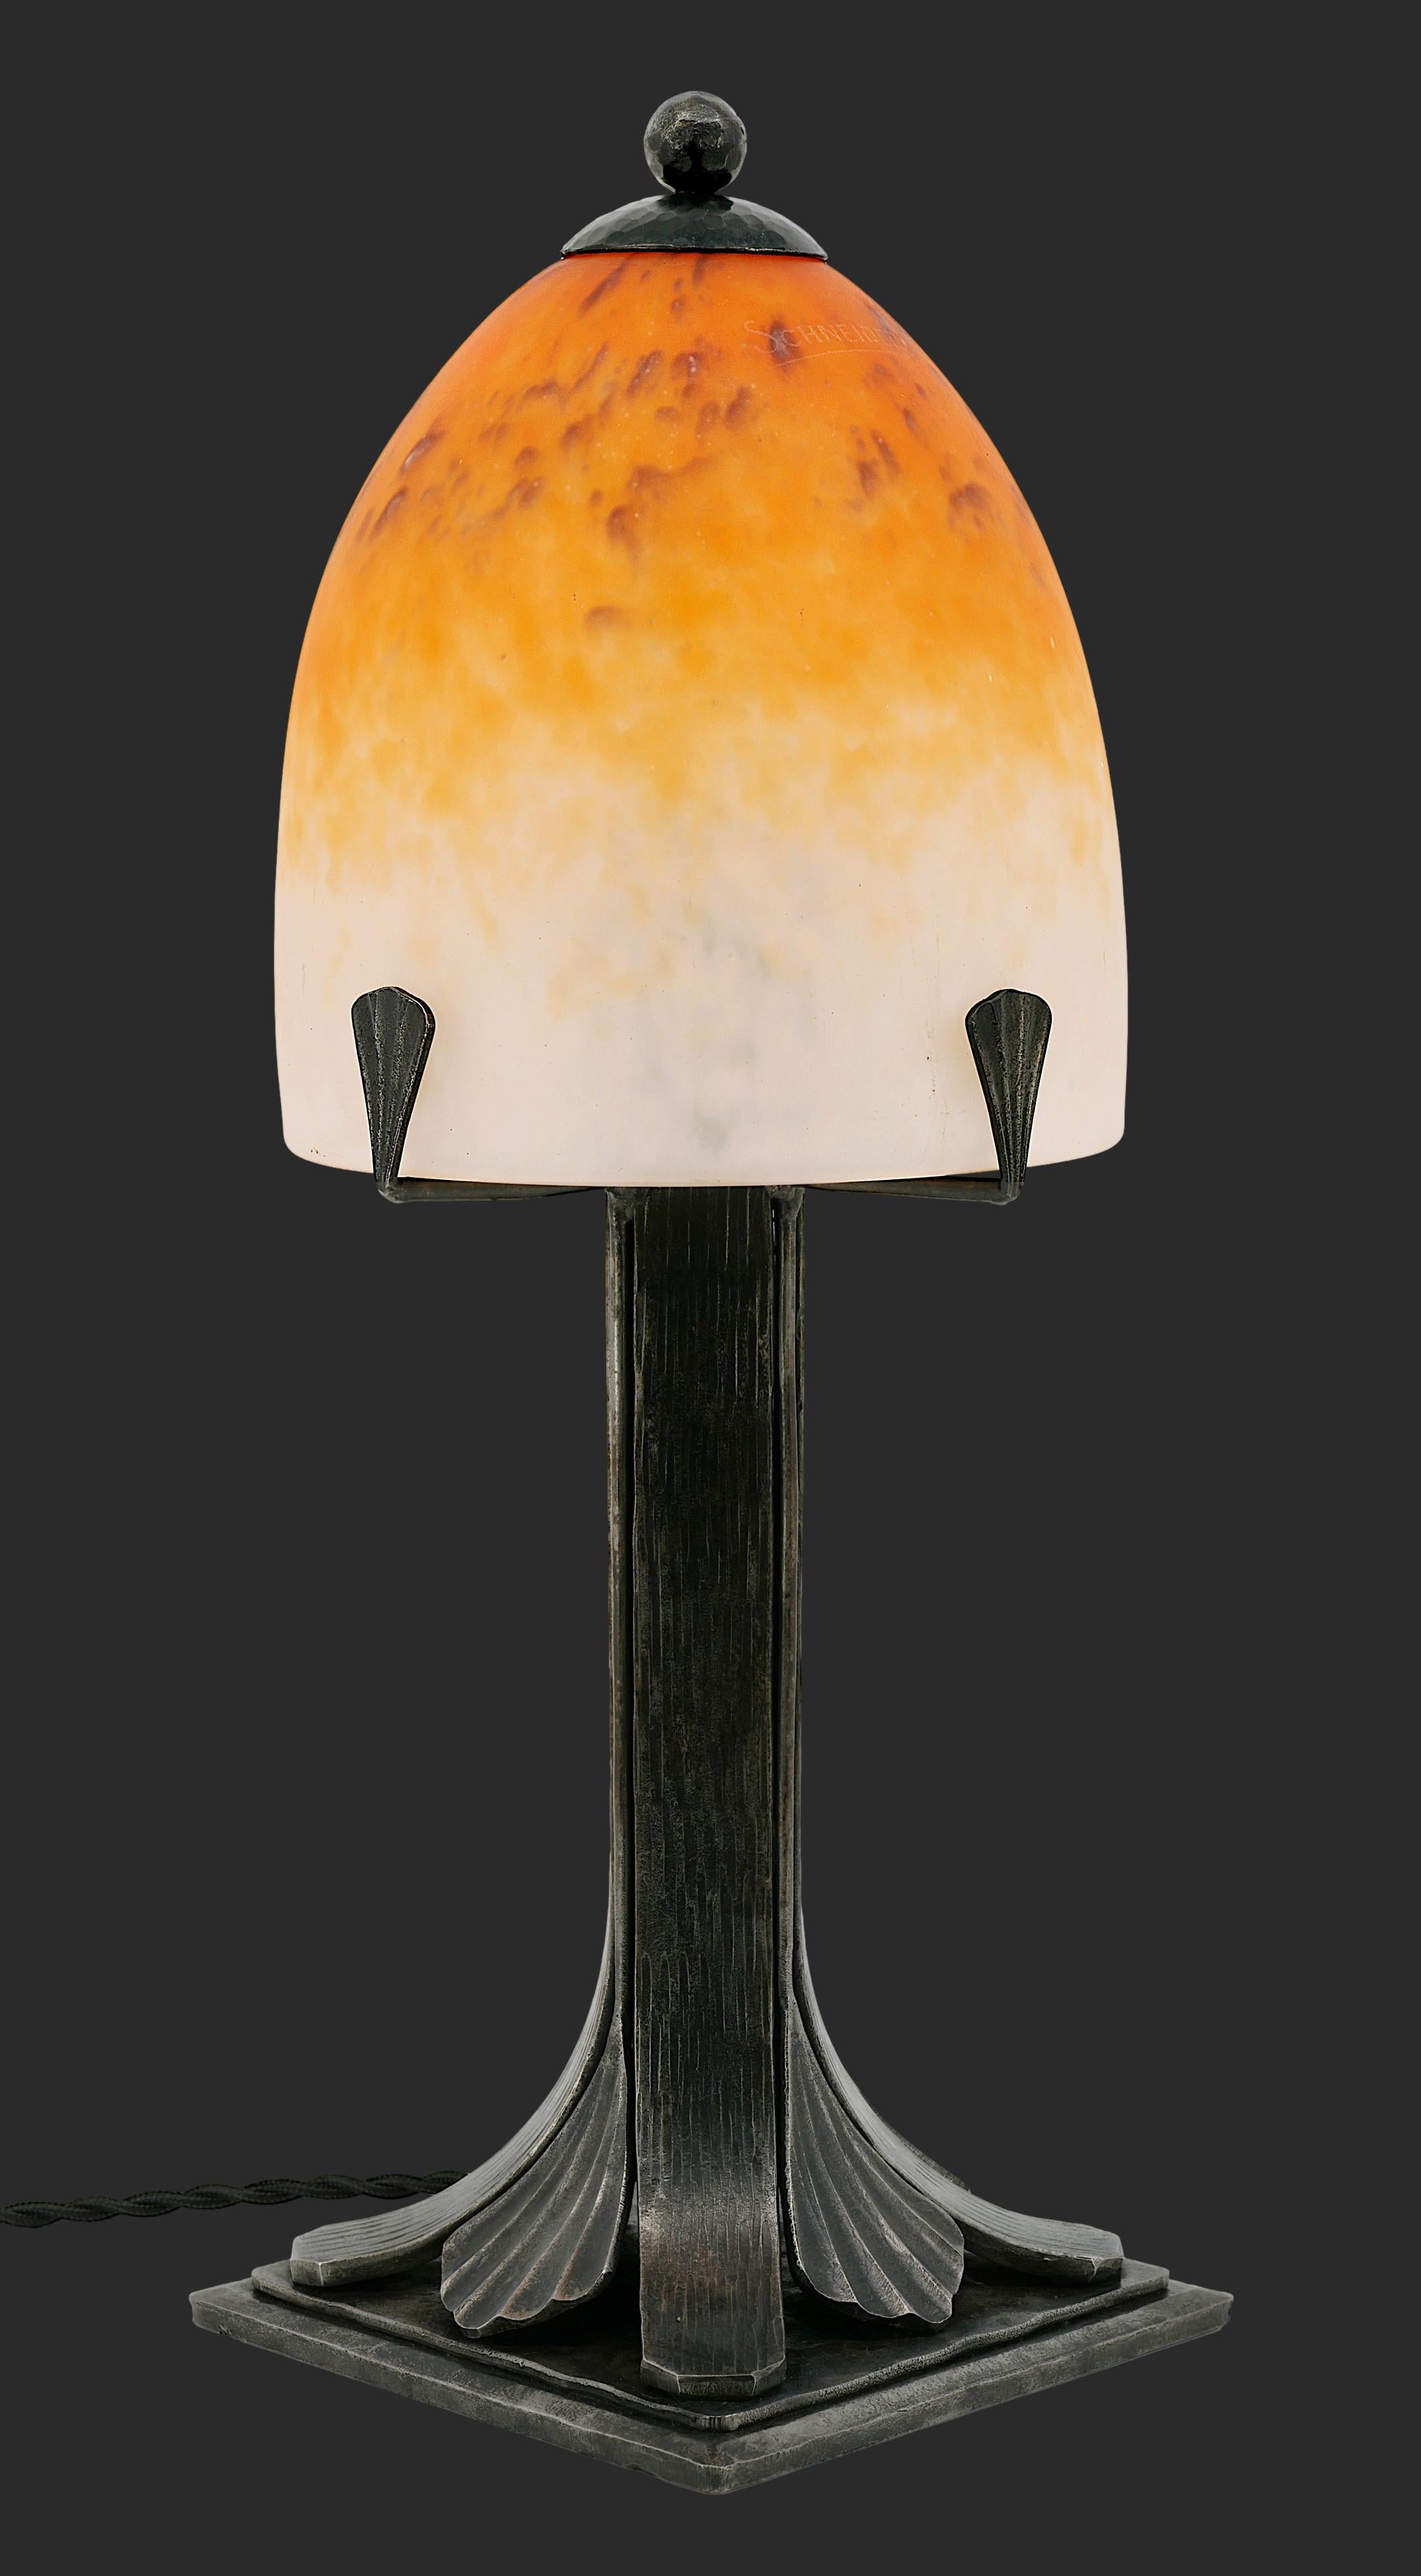 French Art Deco table lamp by Charles Schneider (Epinay-sur-Seine, Paris), France, ca.1924-1928. This blown molded glass shade made by Charles Schneider comes on its gorgeous wrought-iron base. The glass shade was made of blown double glass with